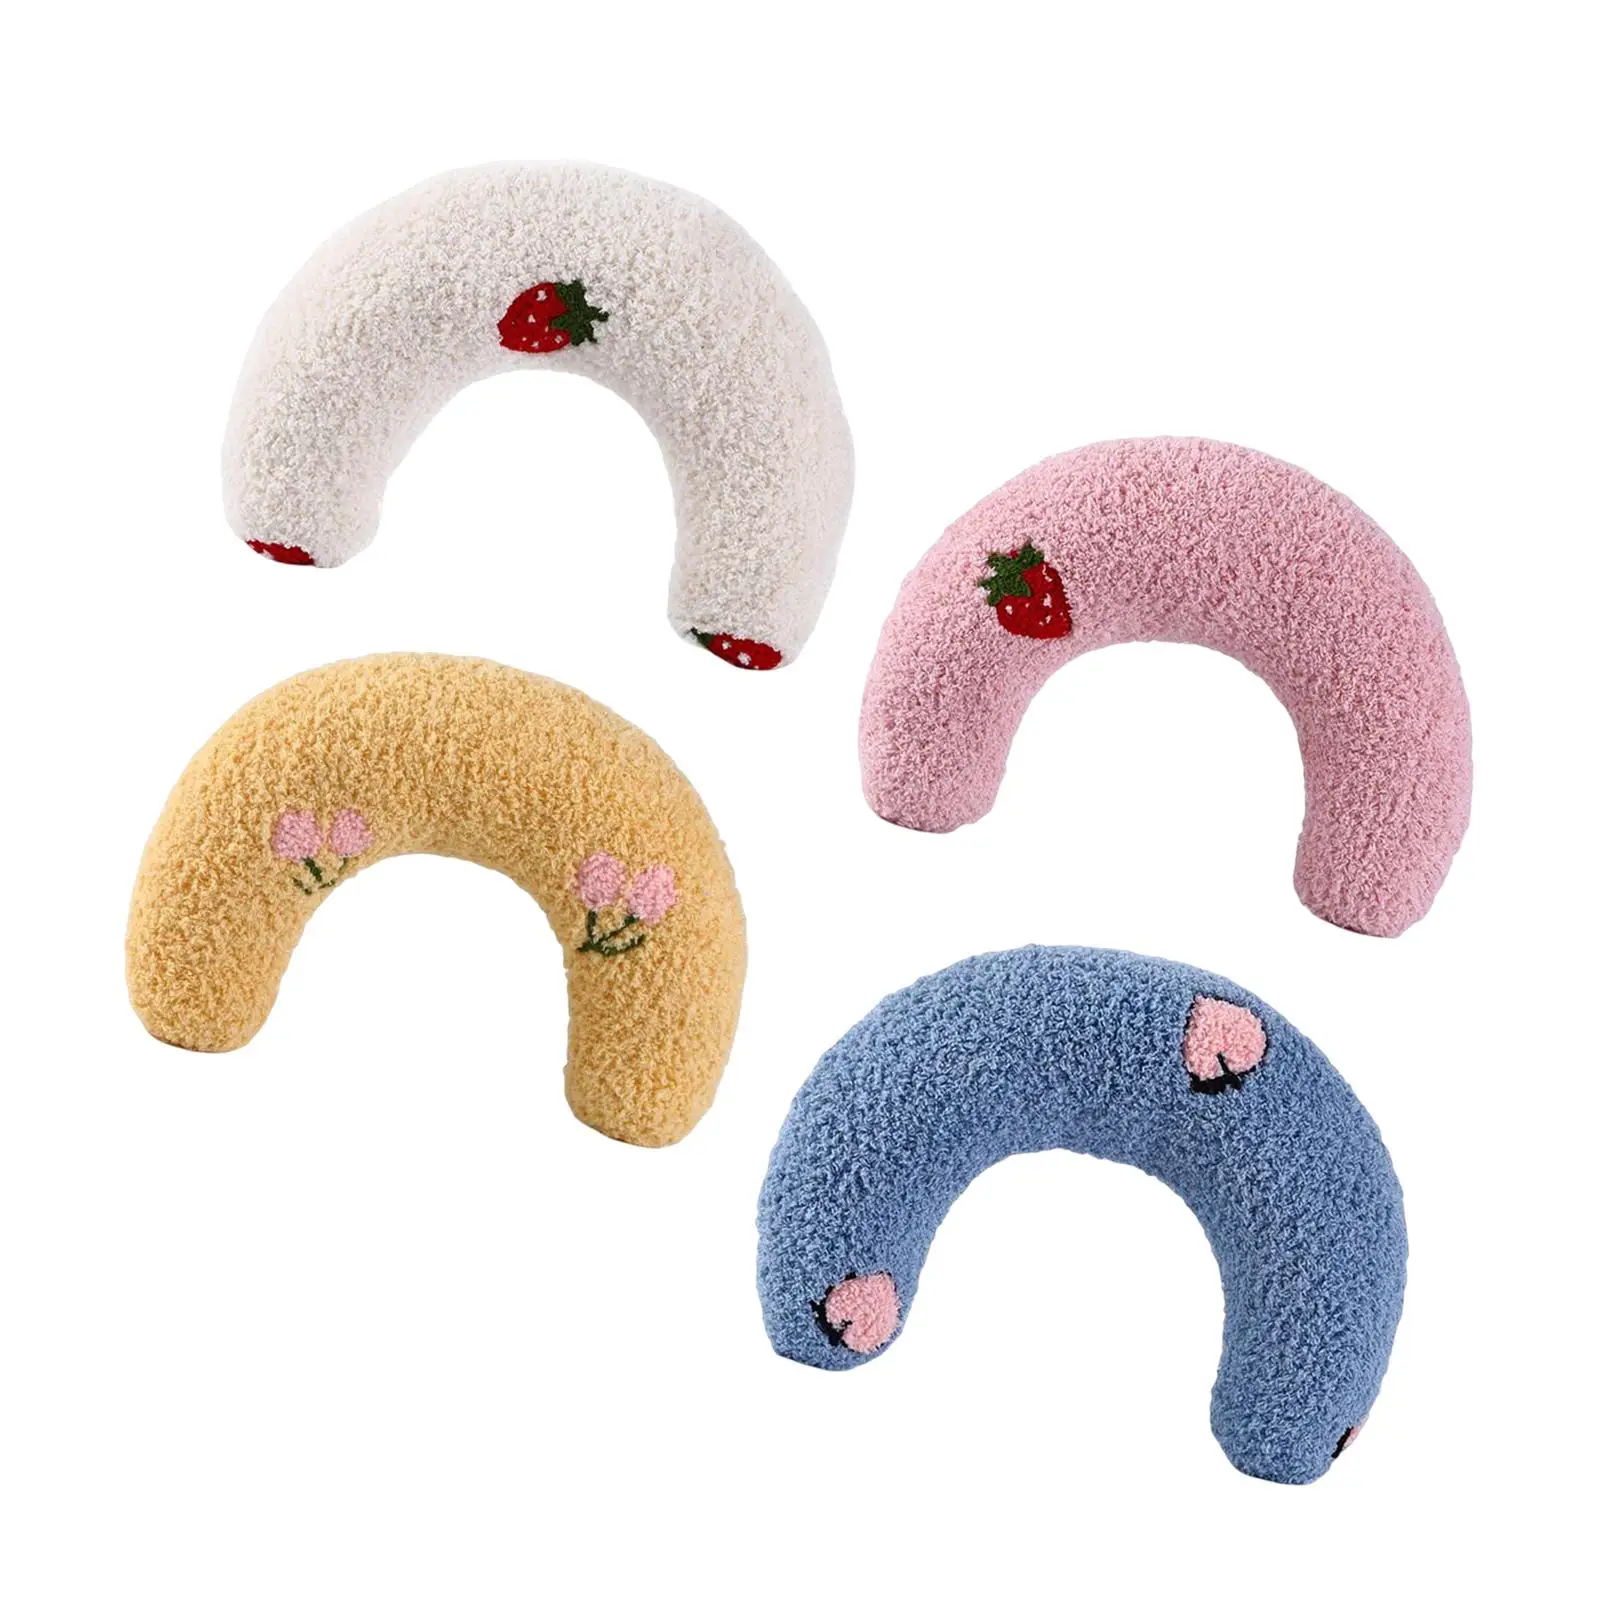 Pets Neck Pillow Chewing Toy Plush Interactive Toys Comfy Stuffed Mat Bed Sleep Pillow for Kitty Dogs Puppy Medium Cat